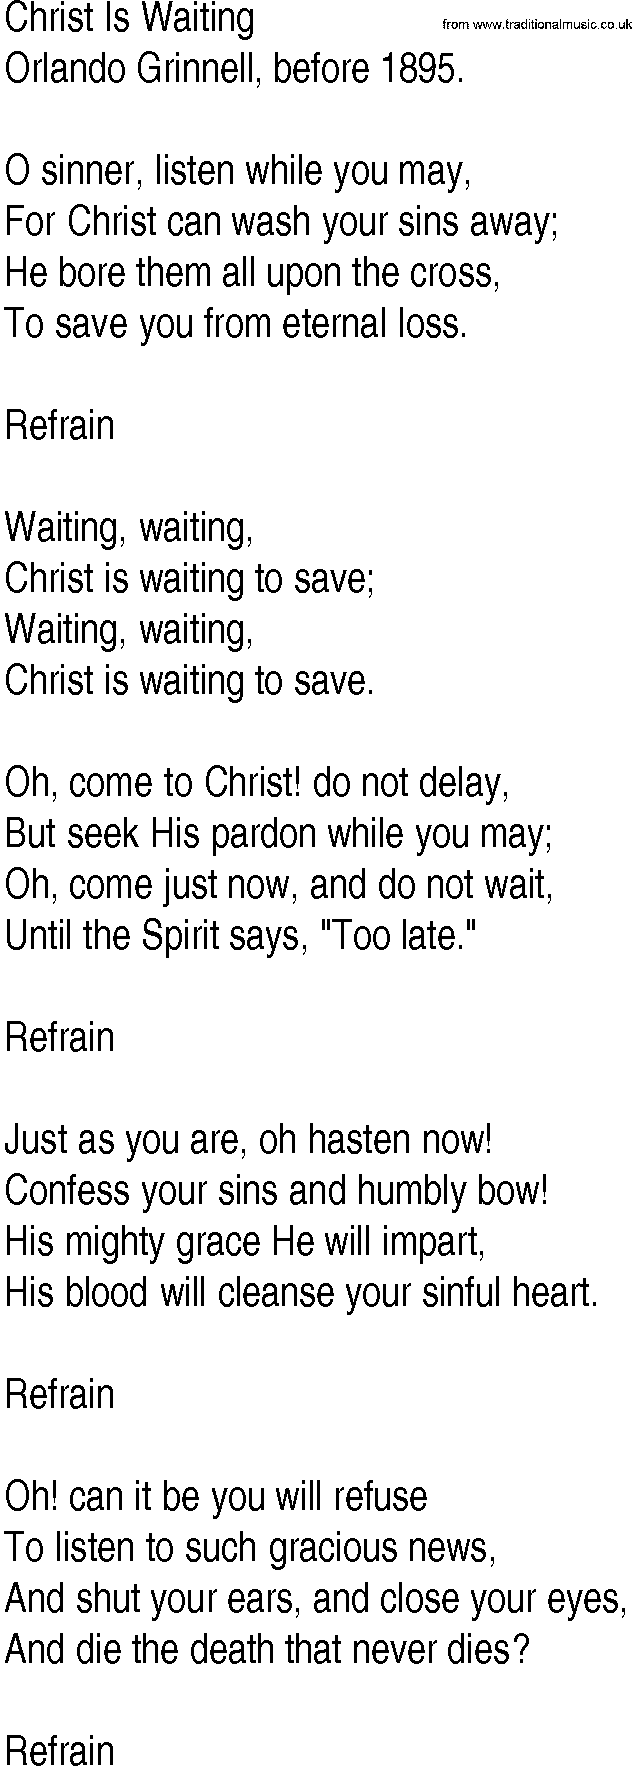 Hymn and Gospel Song: Christ Is Waiting by Orlando Grinnell before lyrics